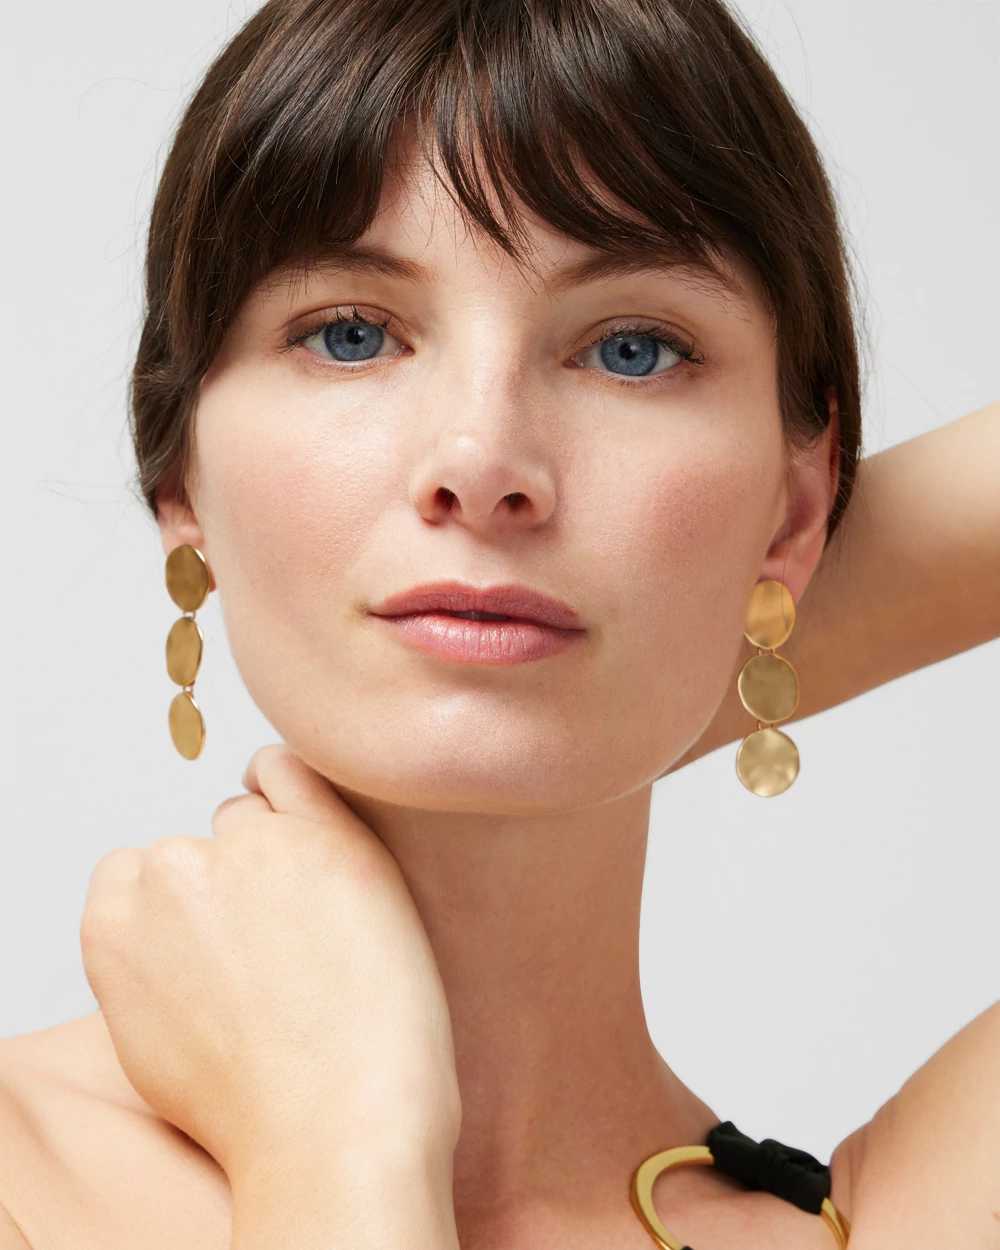 Goldtone Wavy Disc Linear Earrings click to view larger image.